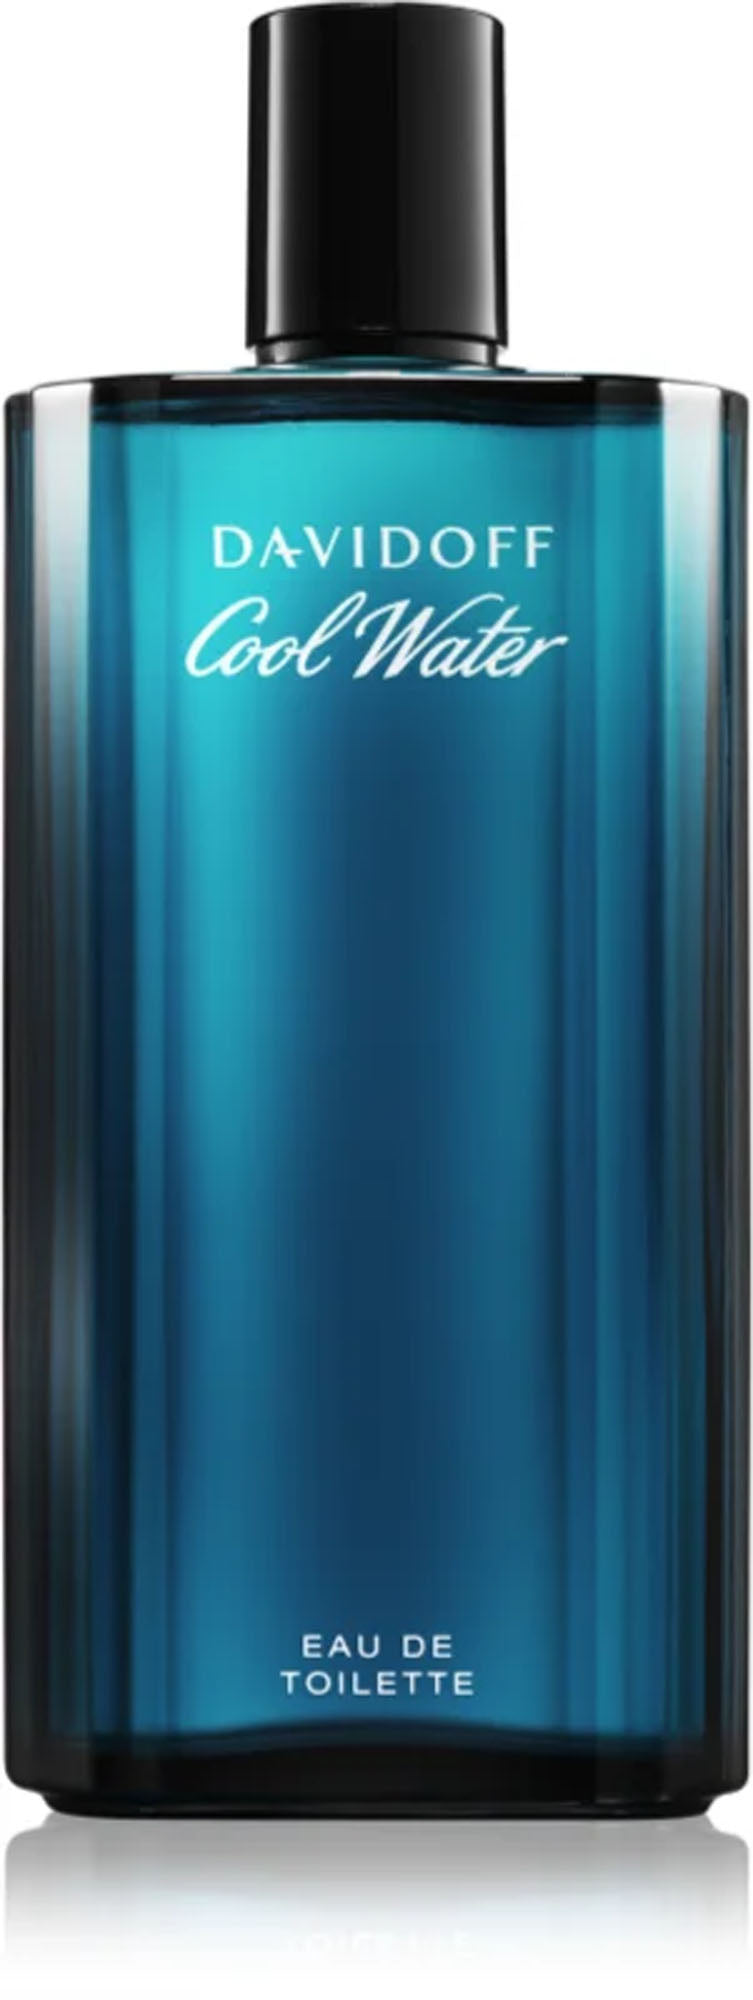 cool water